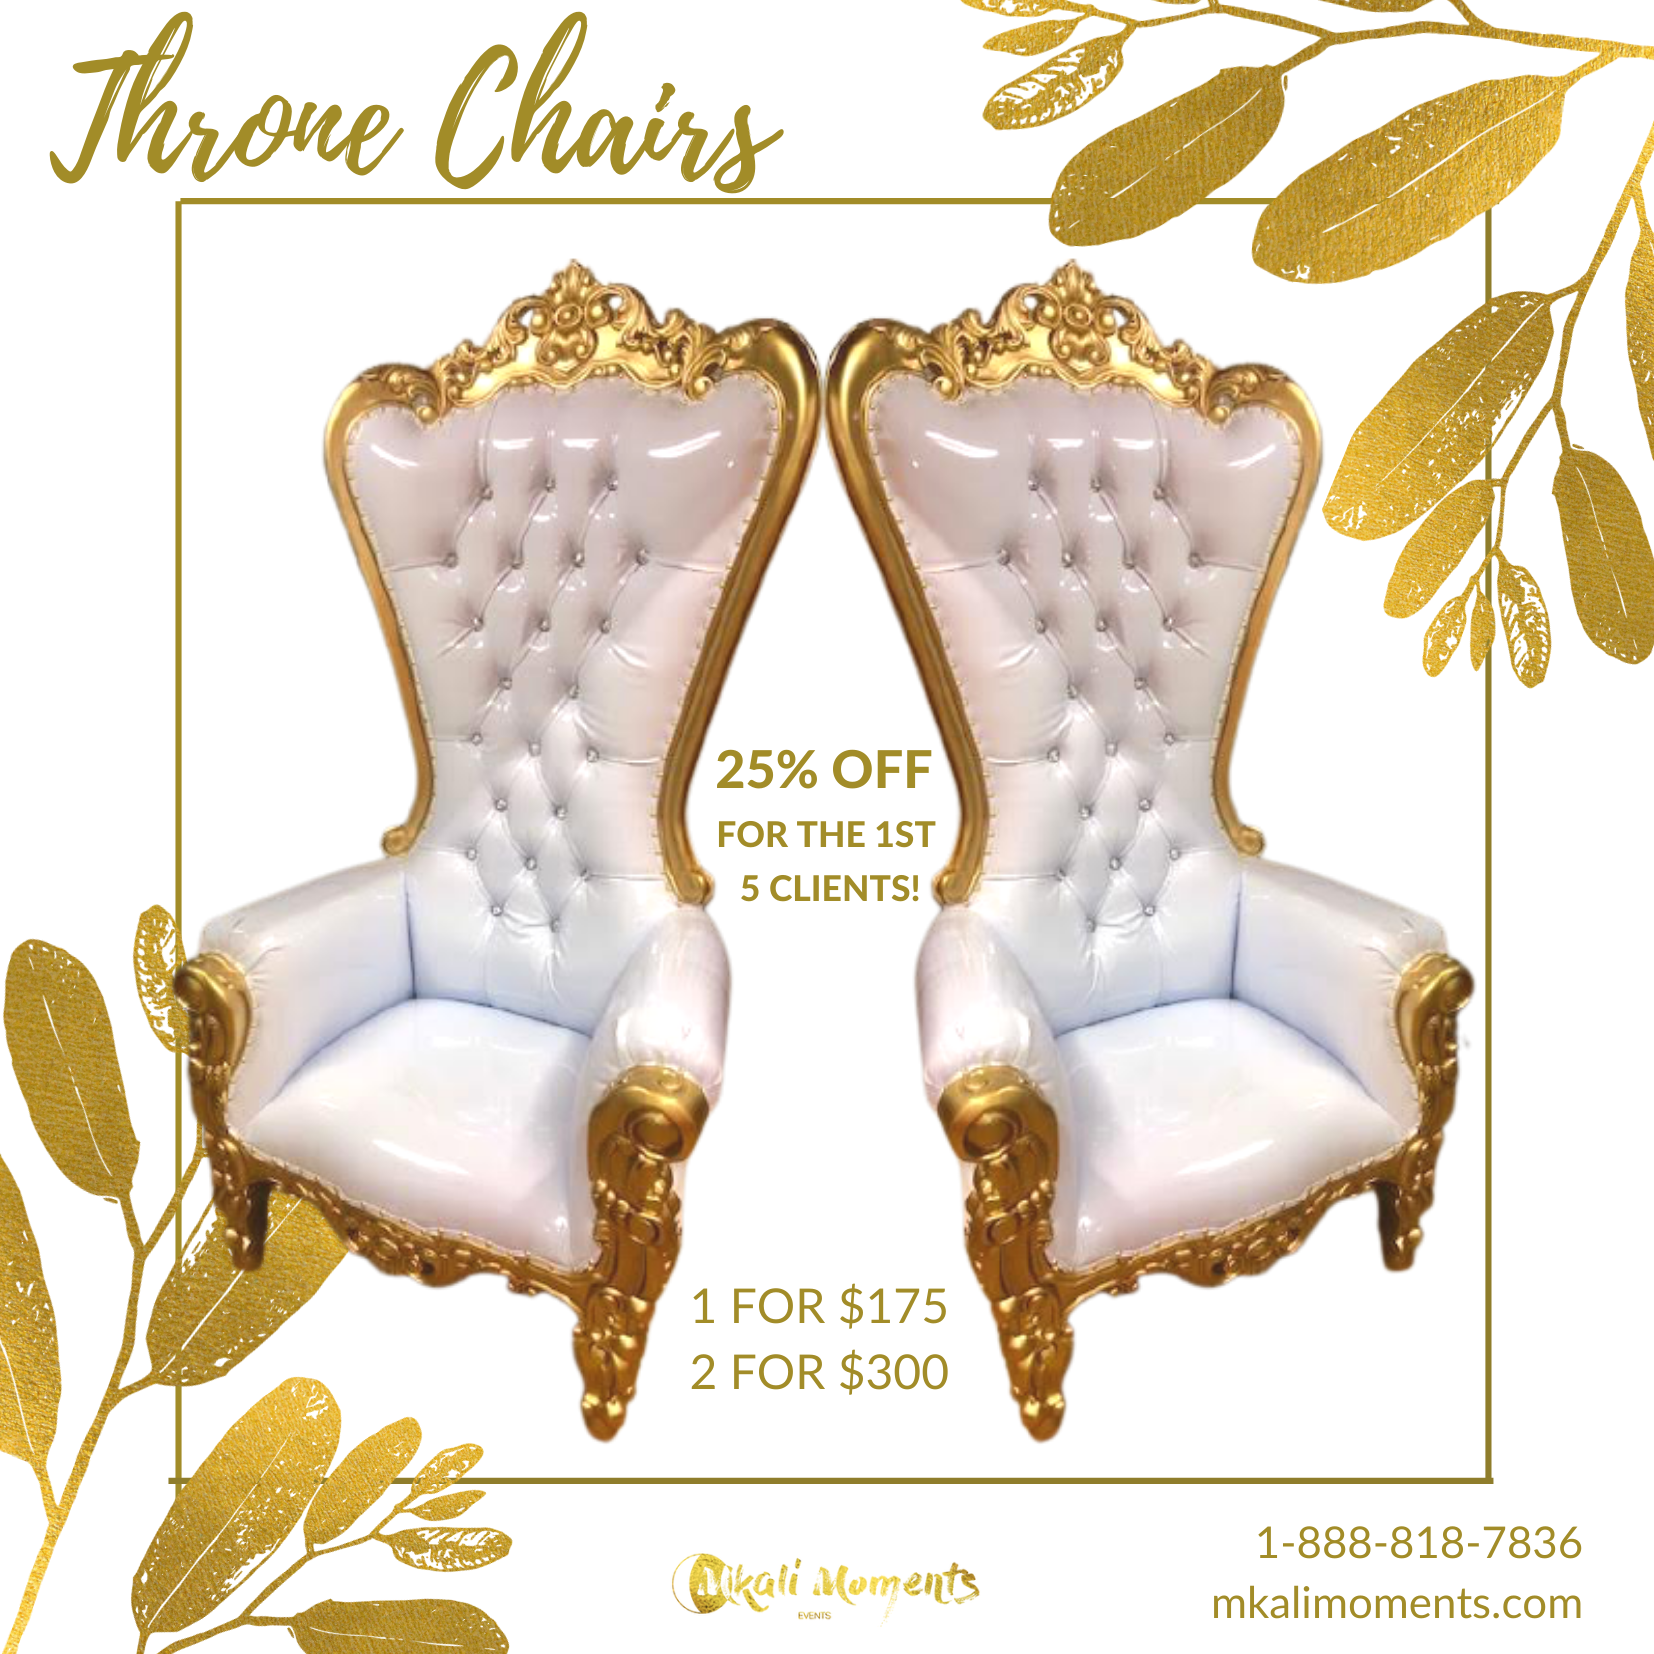 White & Gold Throne Chairs Rental